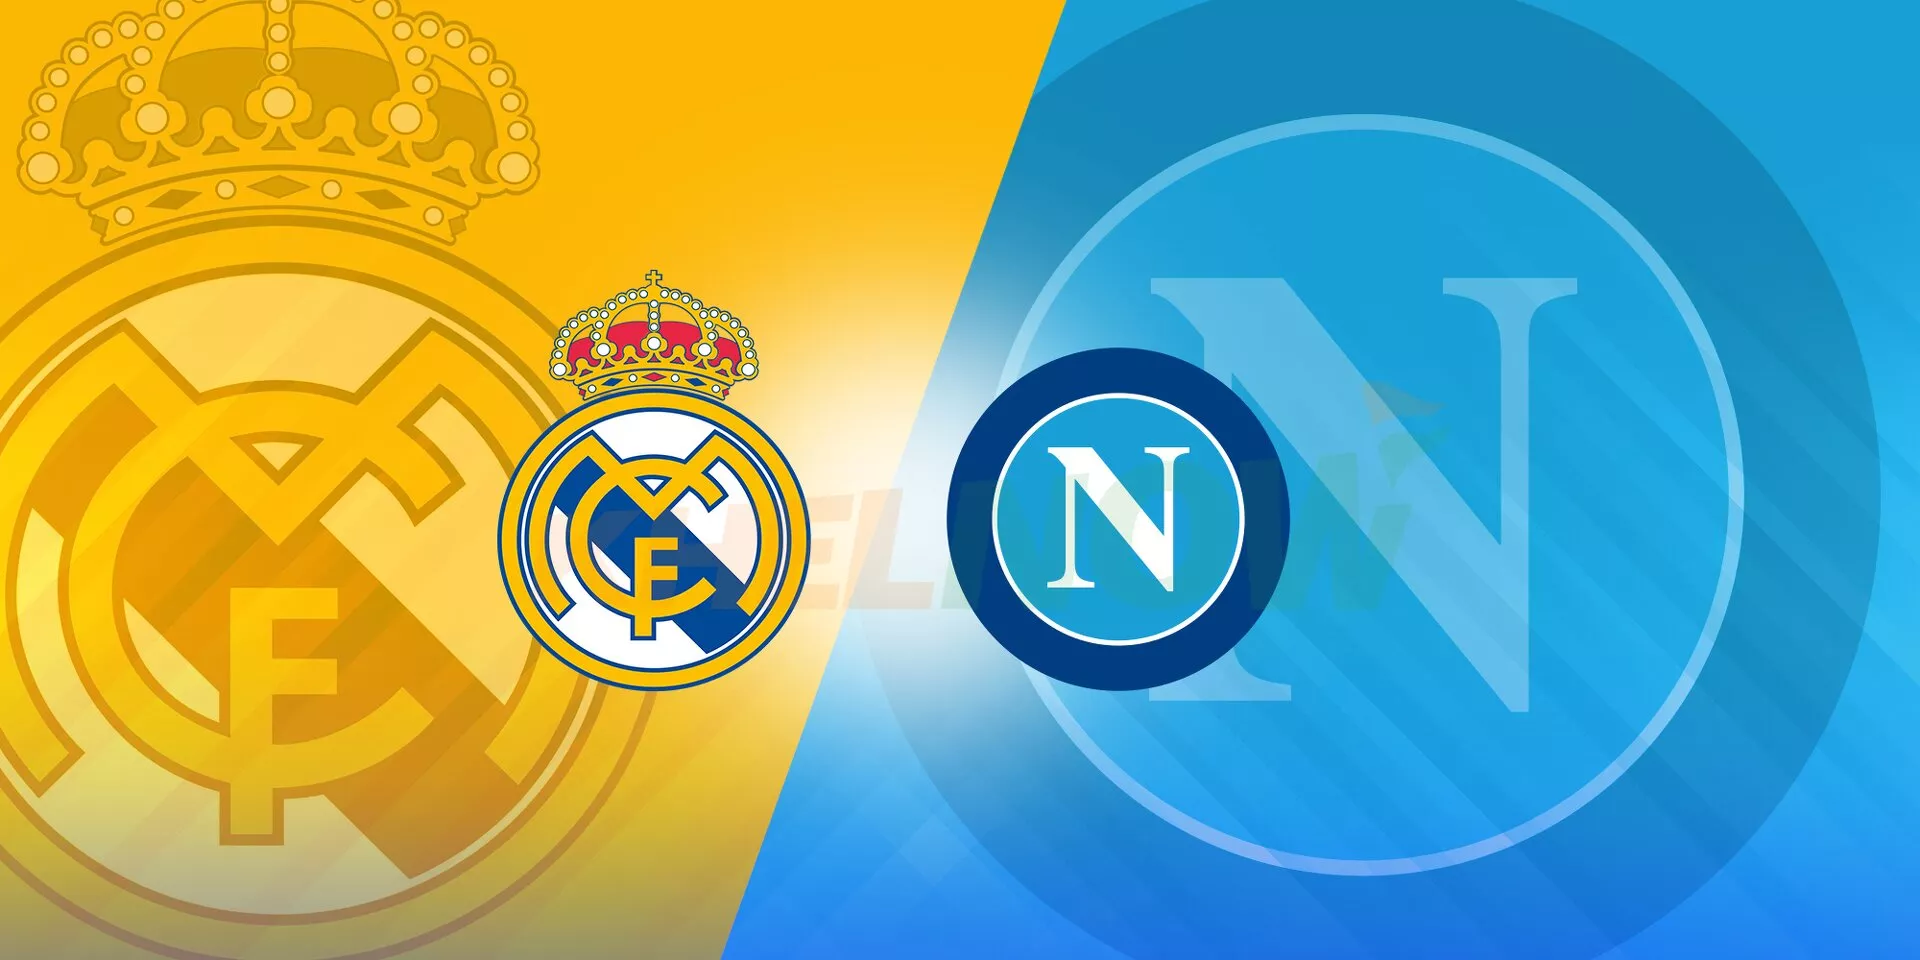 Real Madrid vs Napoli: Where and how to watch?